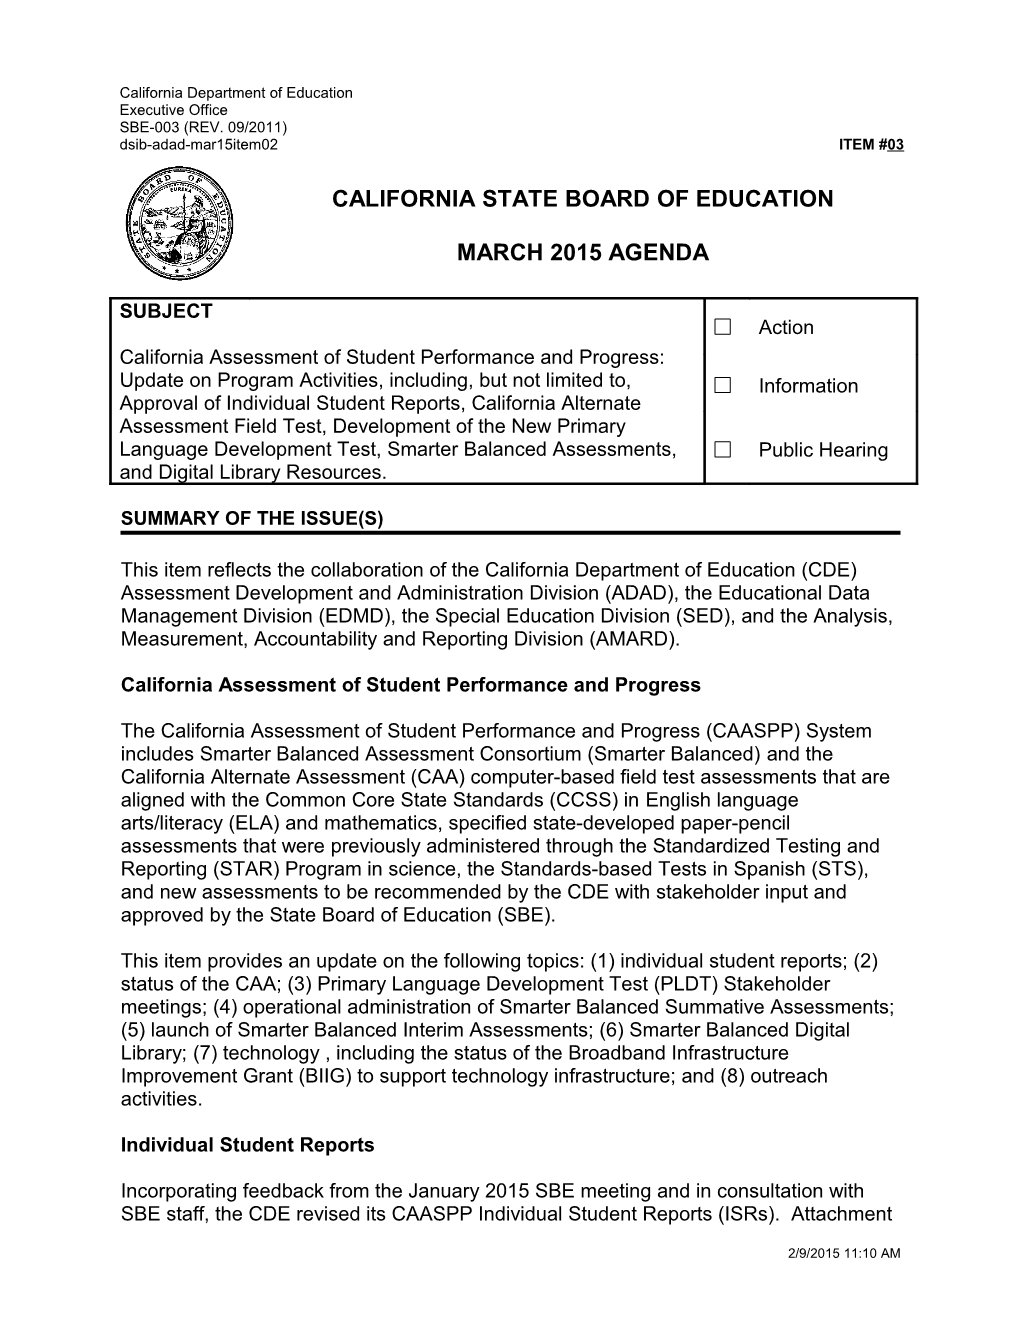 March 2015 Agenda Item 03 - Meeting Agendas (CA State Board of Education)